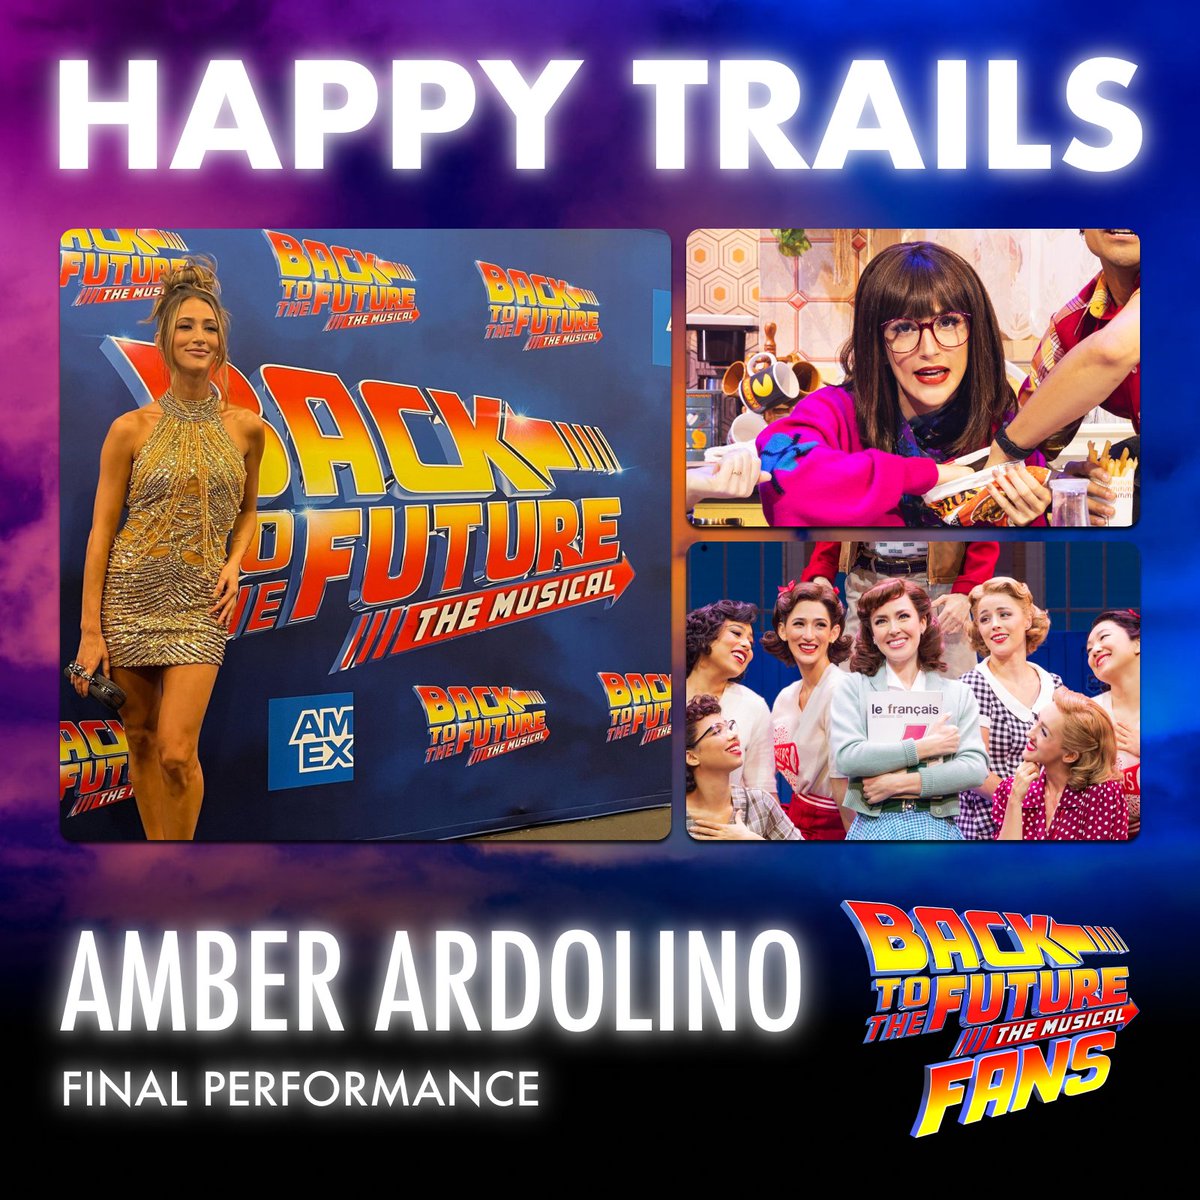 HAPPY TRAILS to Amber Ardolino who will be leaving #HillValley after tonight’s performance of @BTTFBway 😢

Once a DeLorean Girl, always a DeLorean Girl 🔥

#bttfbway #bttfbroadway #backtothefuturebroadway #bttfmusical #backtothefuturemusical #backtothefuturethemusical